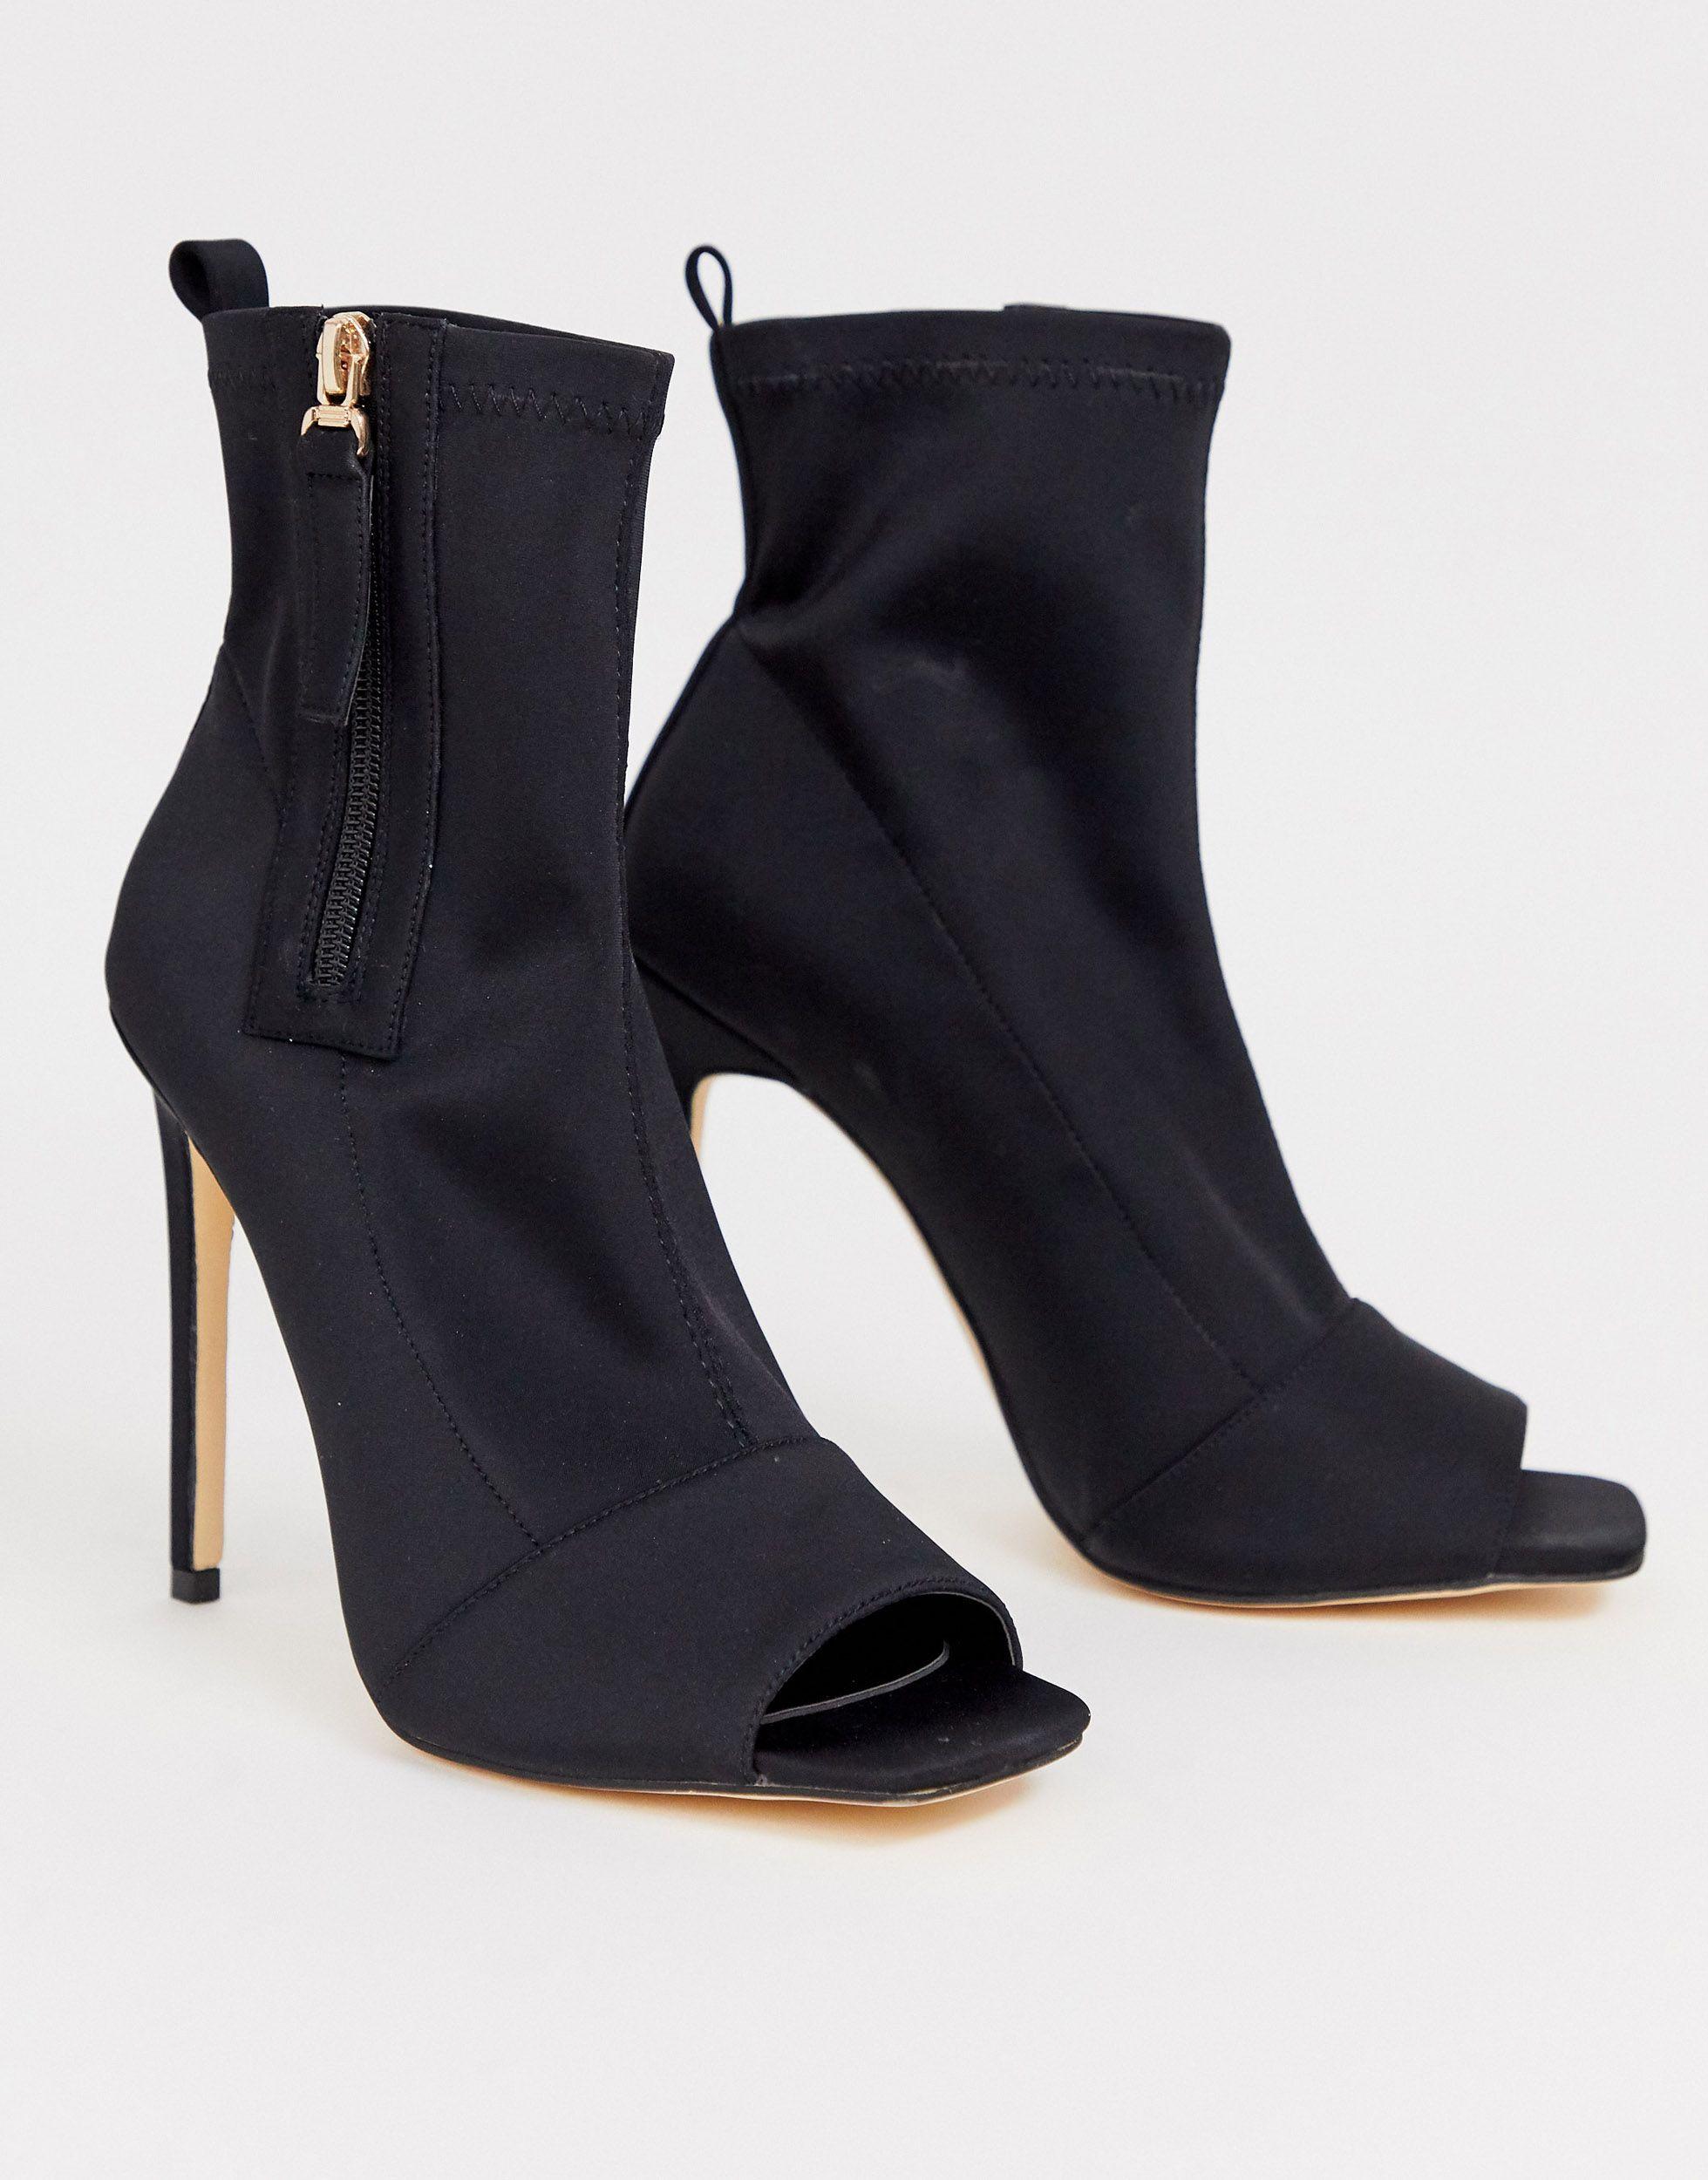 Sloane Wide Fit Black Thigh High Stiletto Boots | SIMMI London